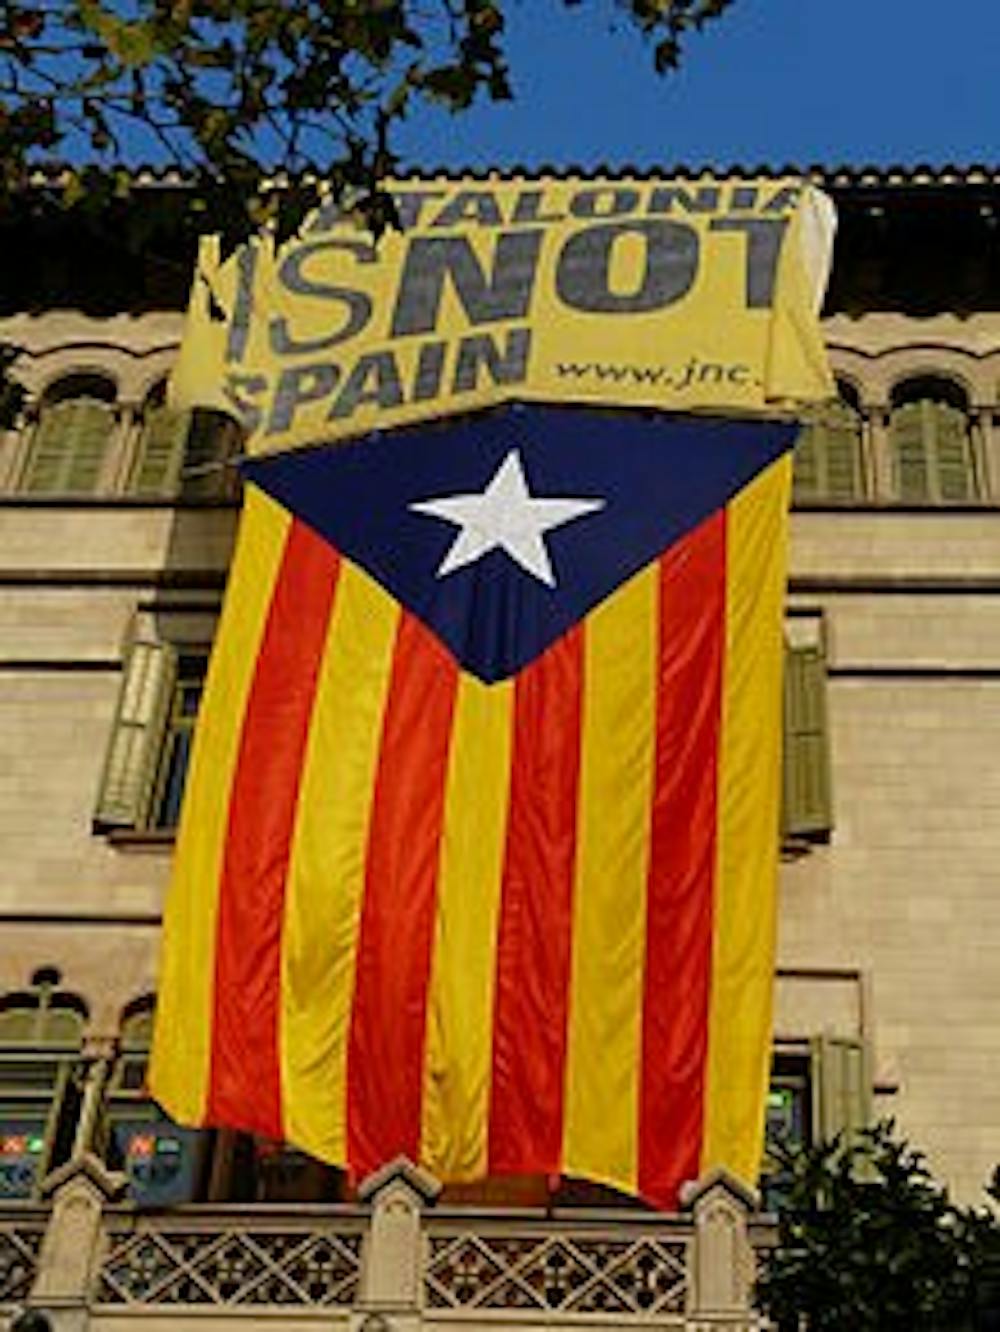 op-catalanflag-courtesywikimediacommons